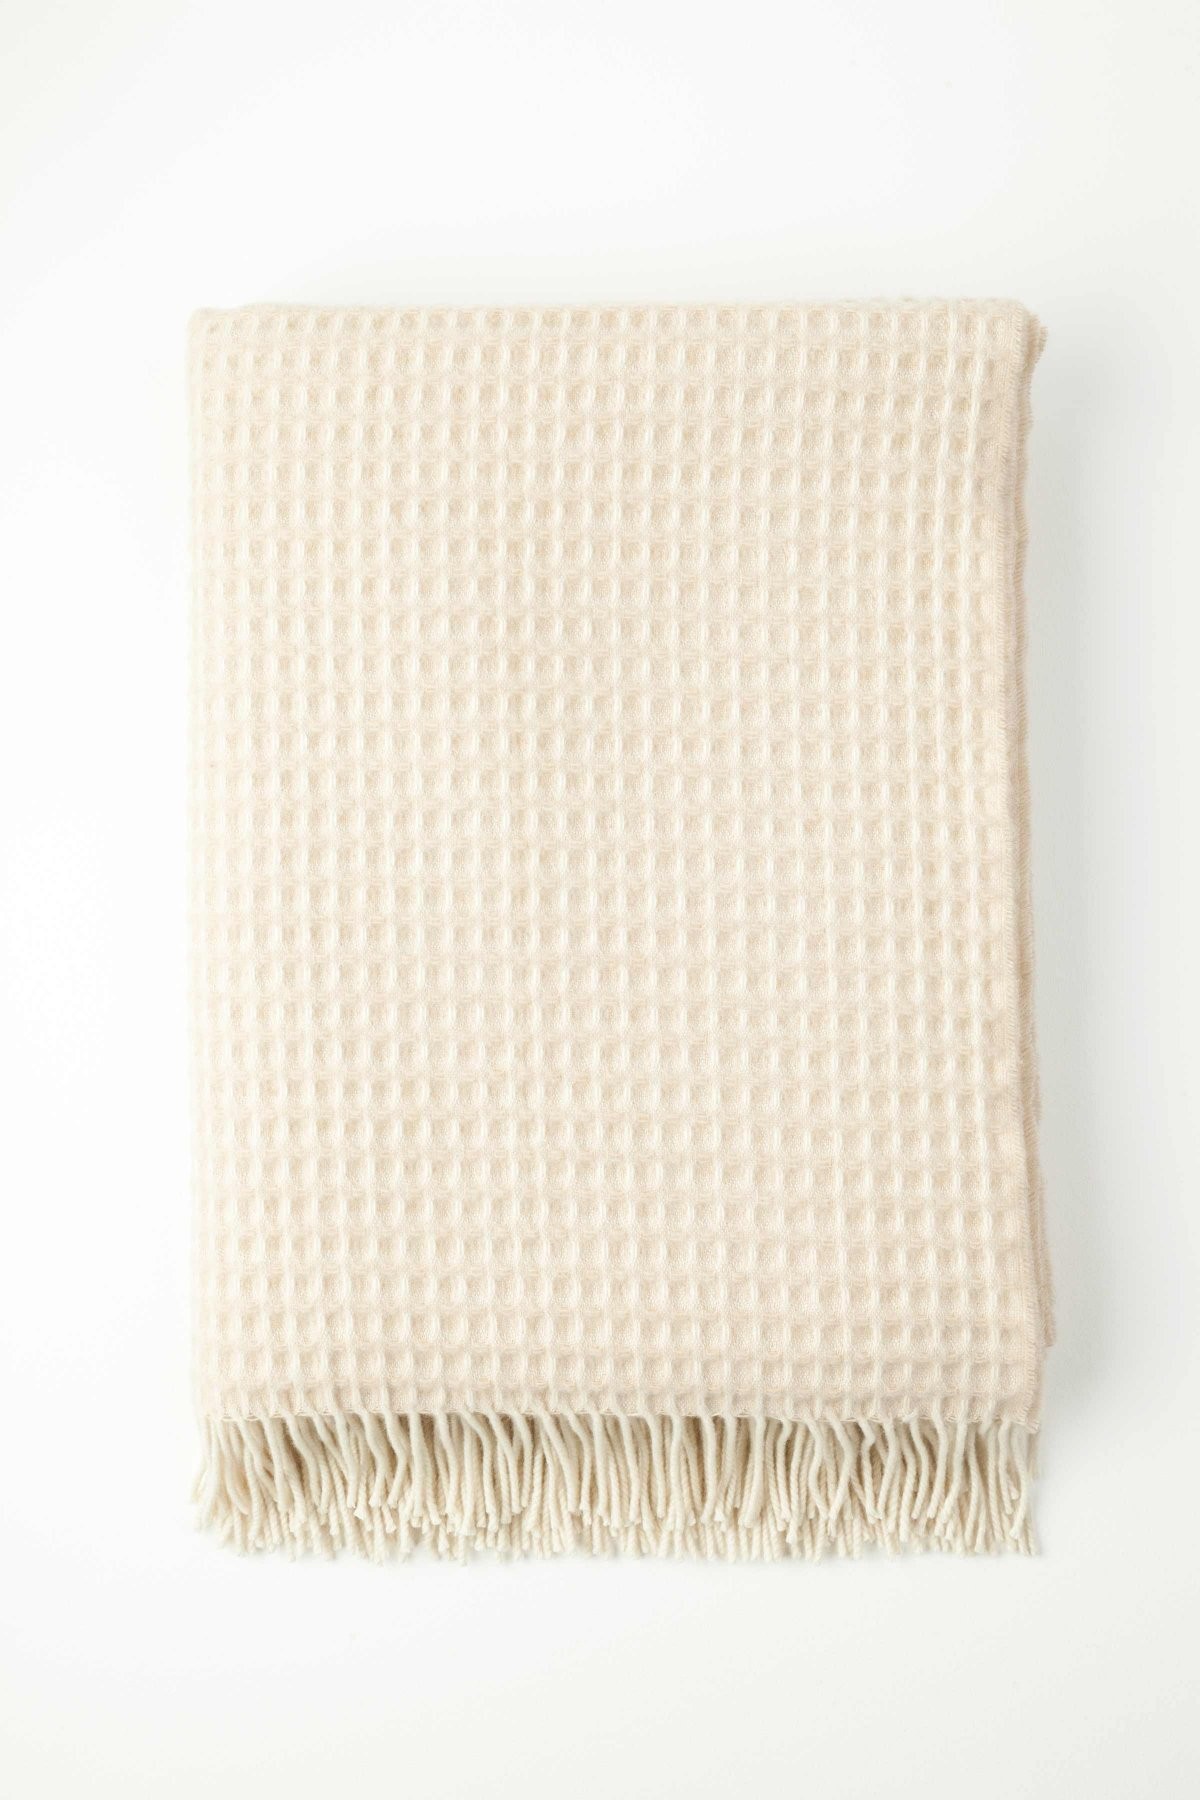 Johnston's of Elgin Cashmere Natural Honeycomb Throw - Natural White